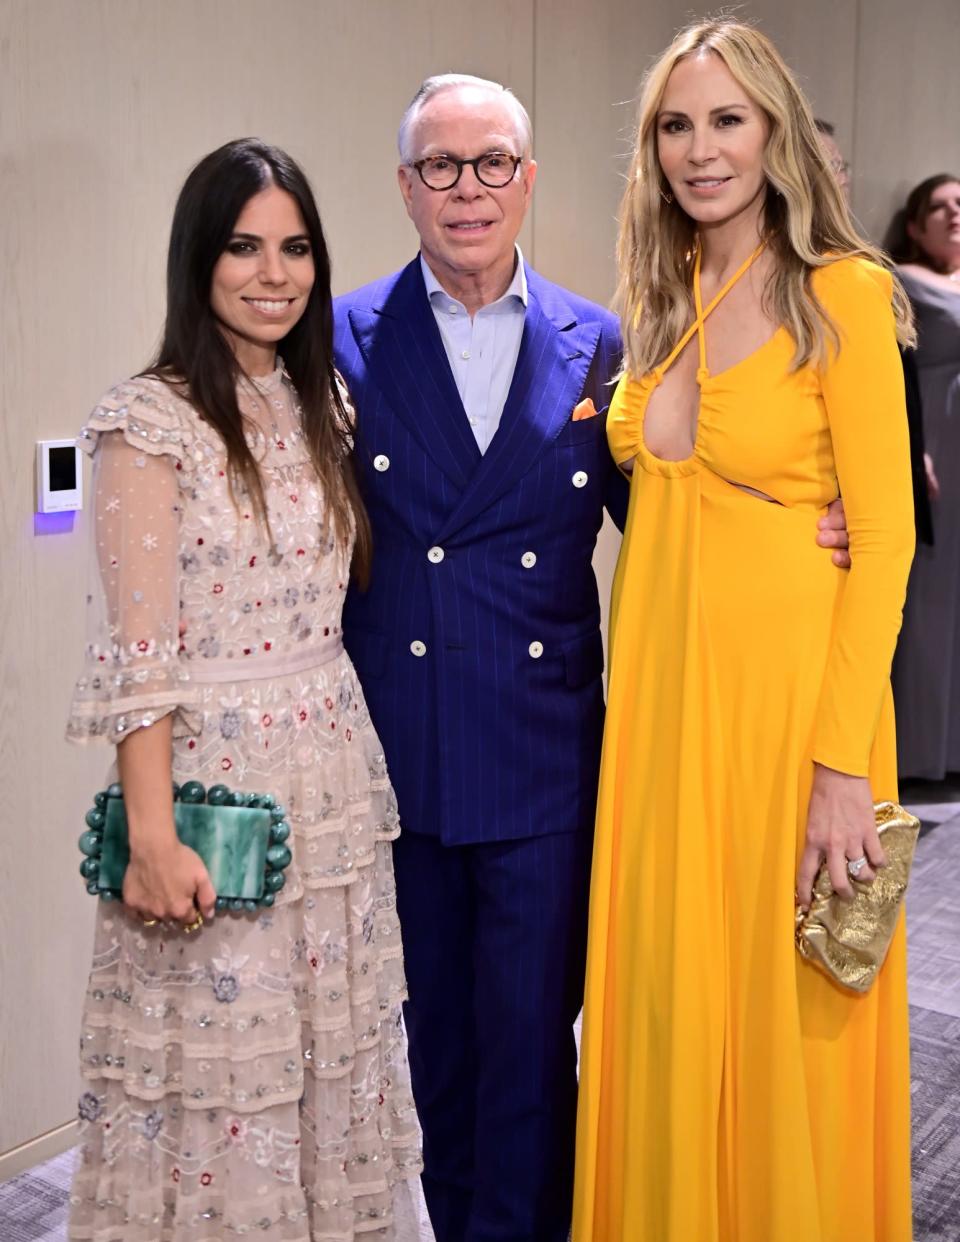 <p>Ally Hilfiger, Tommy Hilfiger and Dee Ocleppo Hilfiger get together at the 29th Annual Race to Erase MS event in L.A. on May 20.</p>